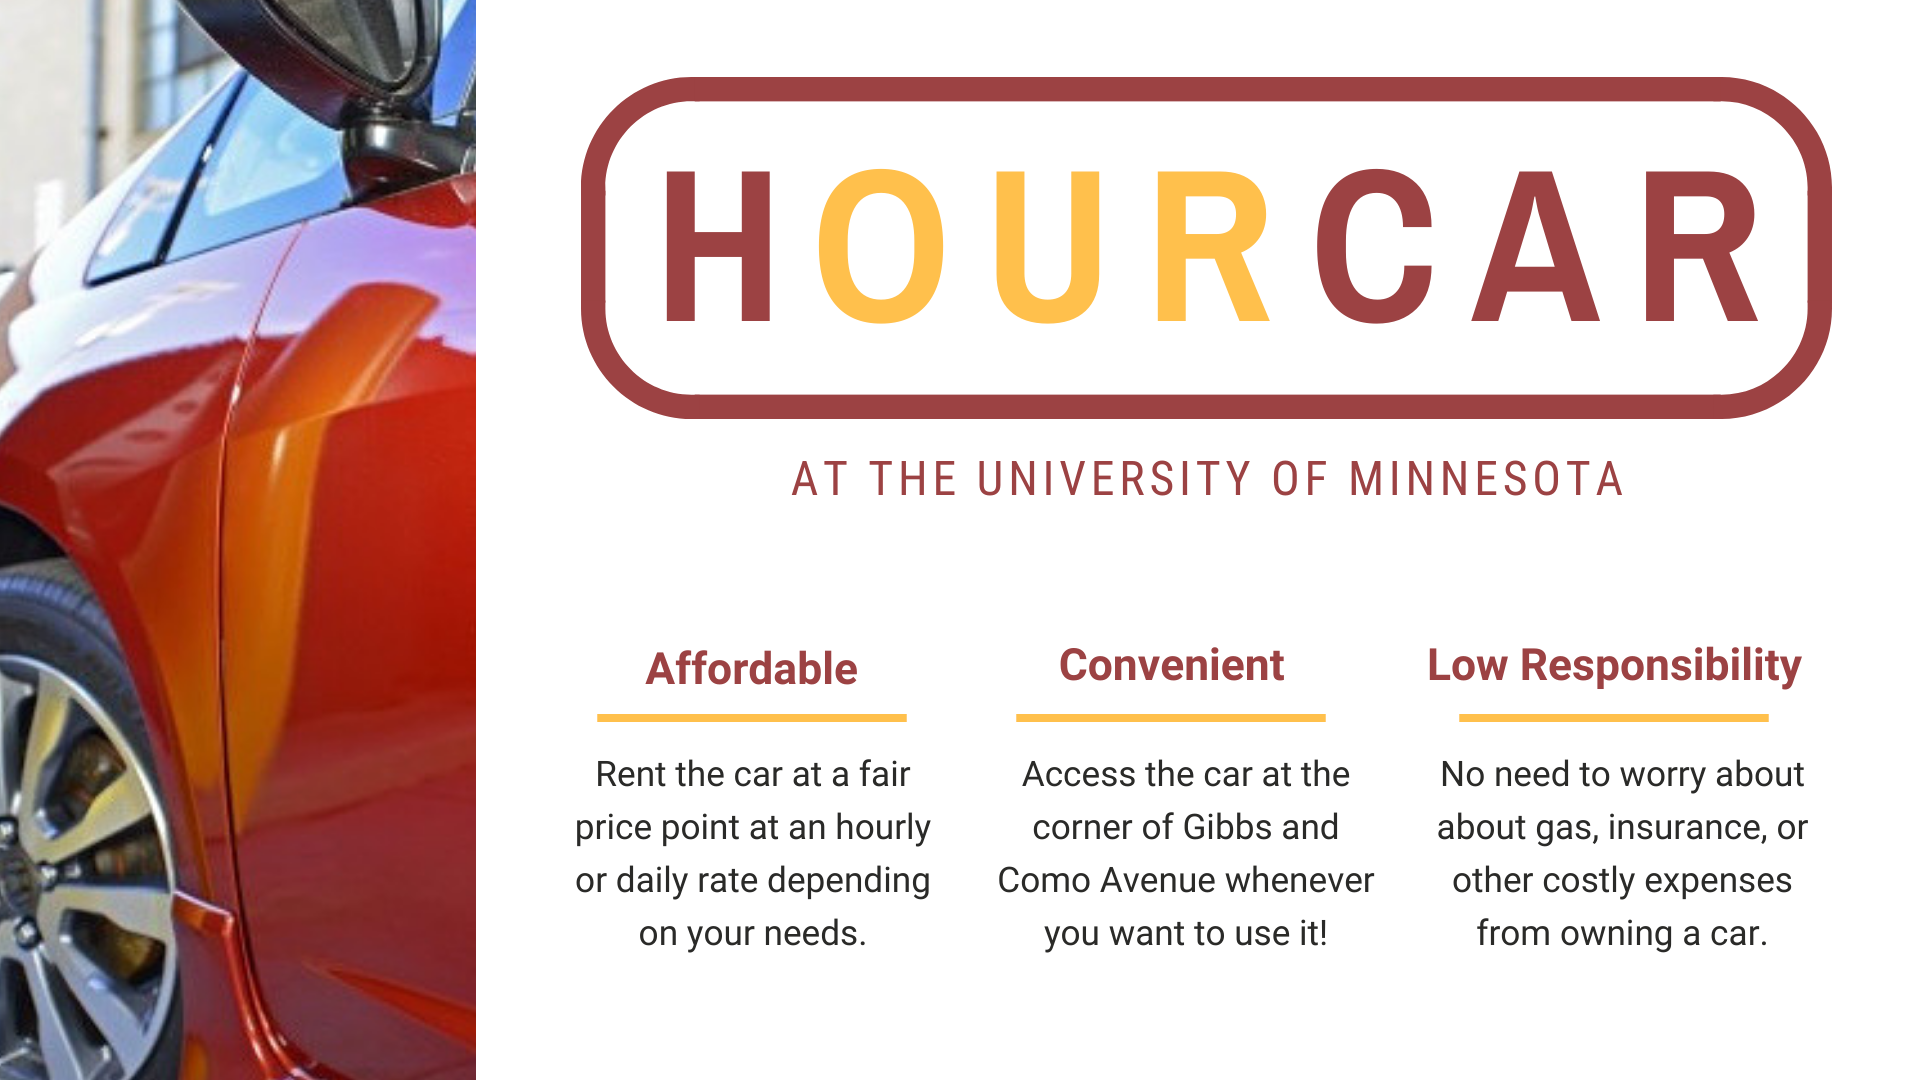 HOURCAR, the benefits of a car sharing service